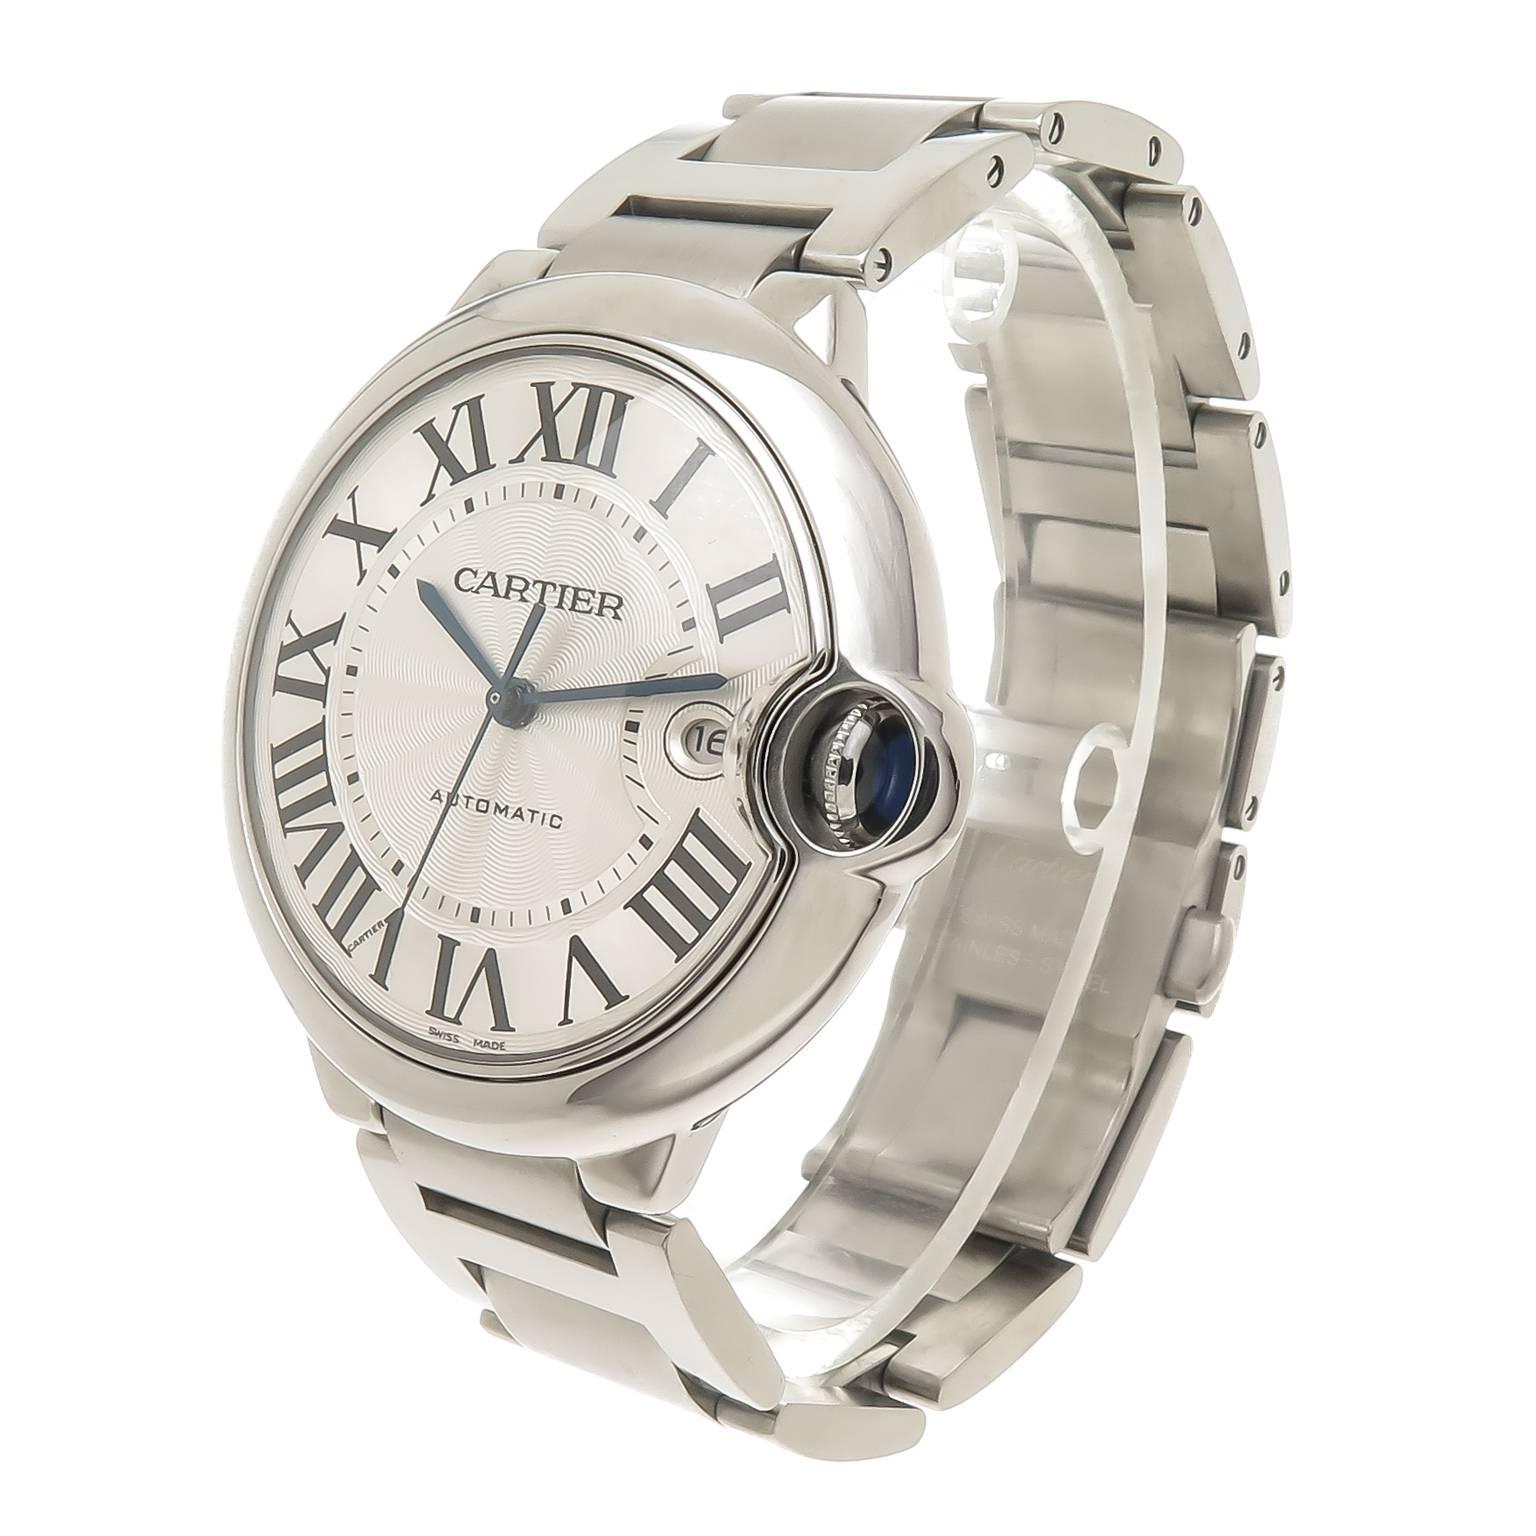 Circa 2014 Cartier Ballon Bleu, 42 MM Stainless Steel water resistant case, Automatic self winding movement, silvered dial with engine turned center, Black Roman numerals and a scratch resistant Crystal. 3/4 inch wide steel bracelet with deployment